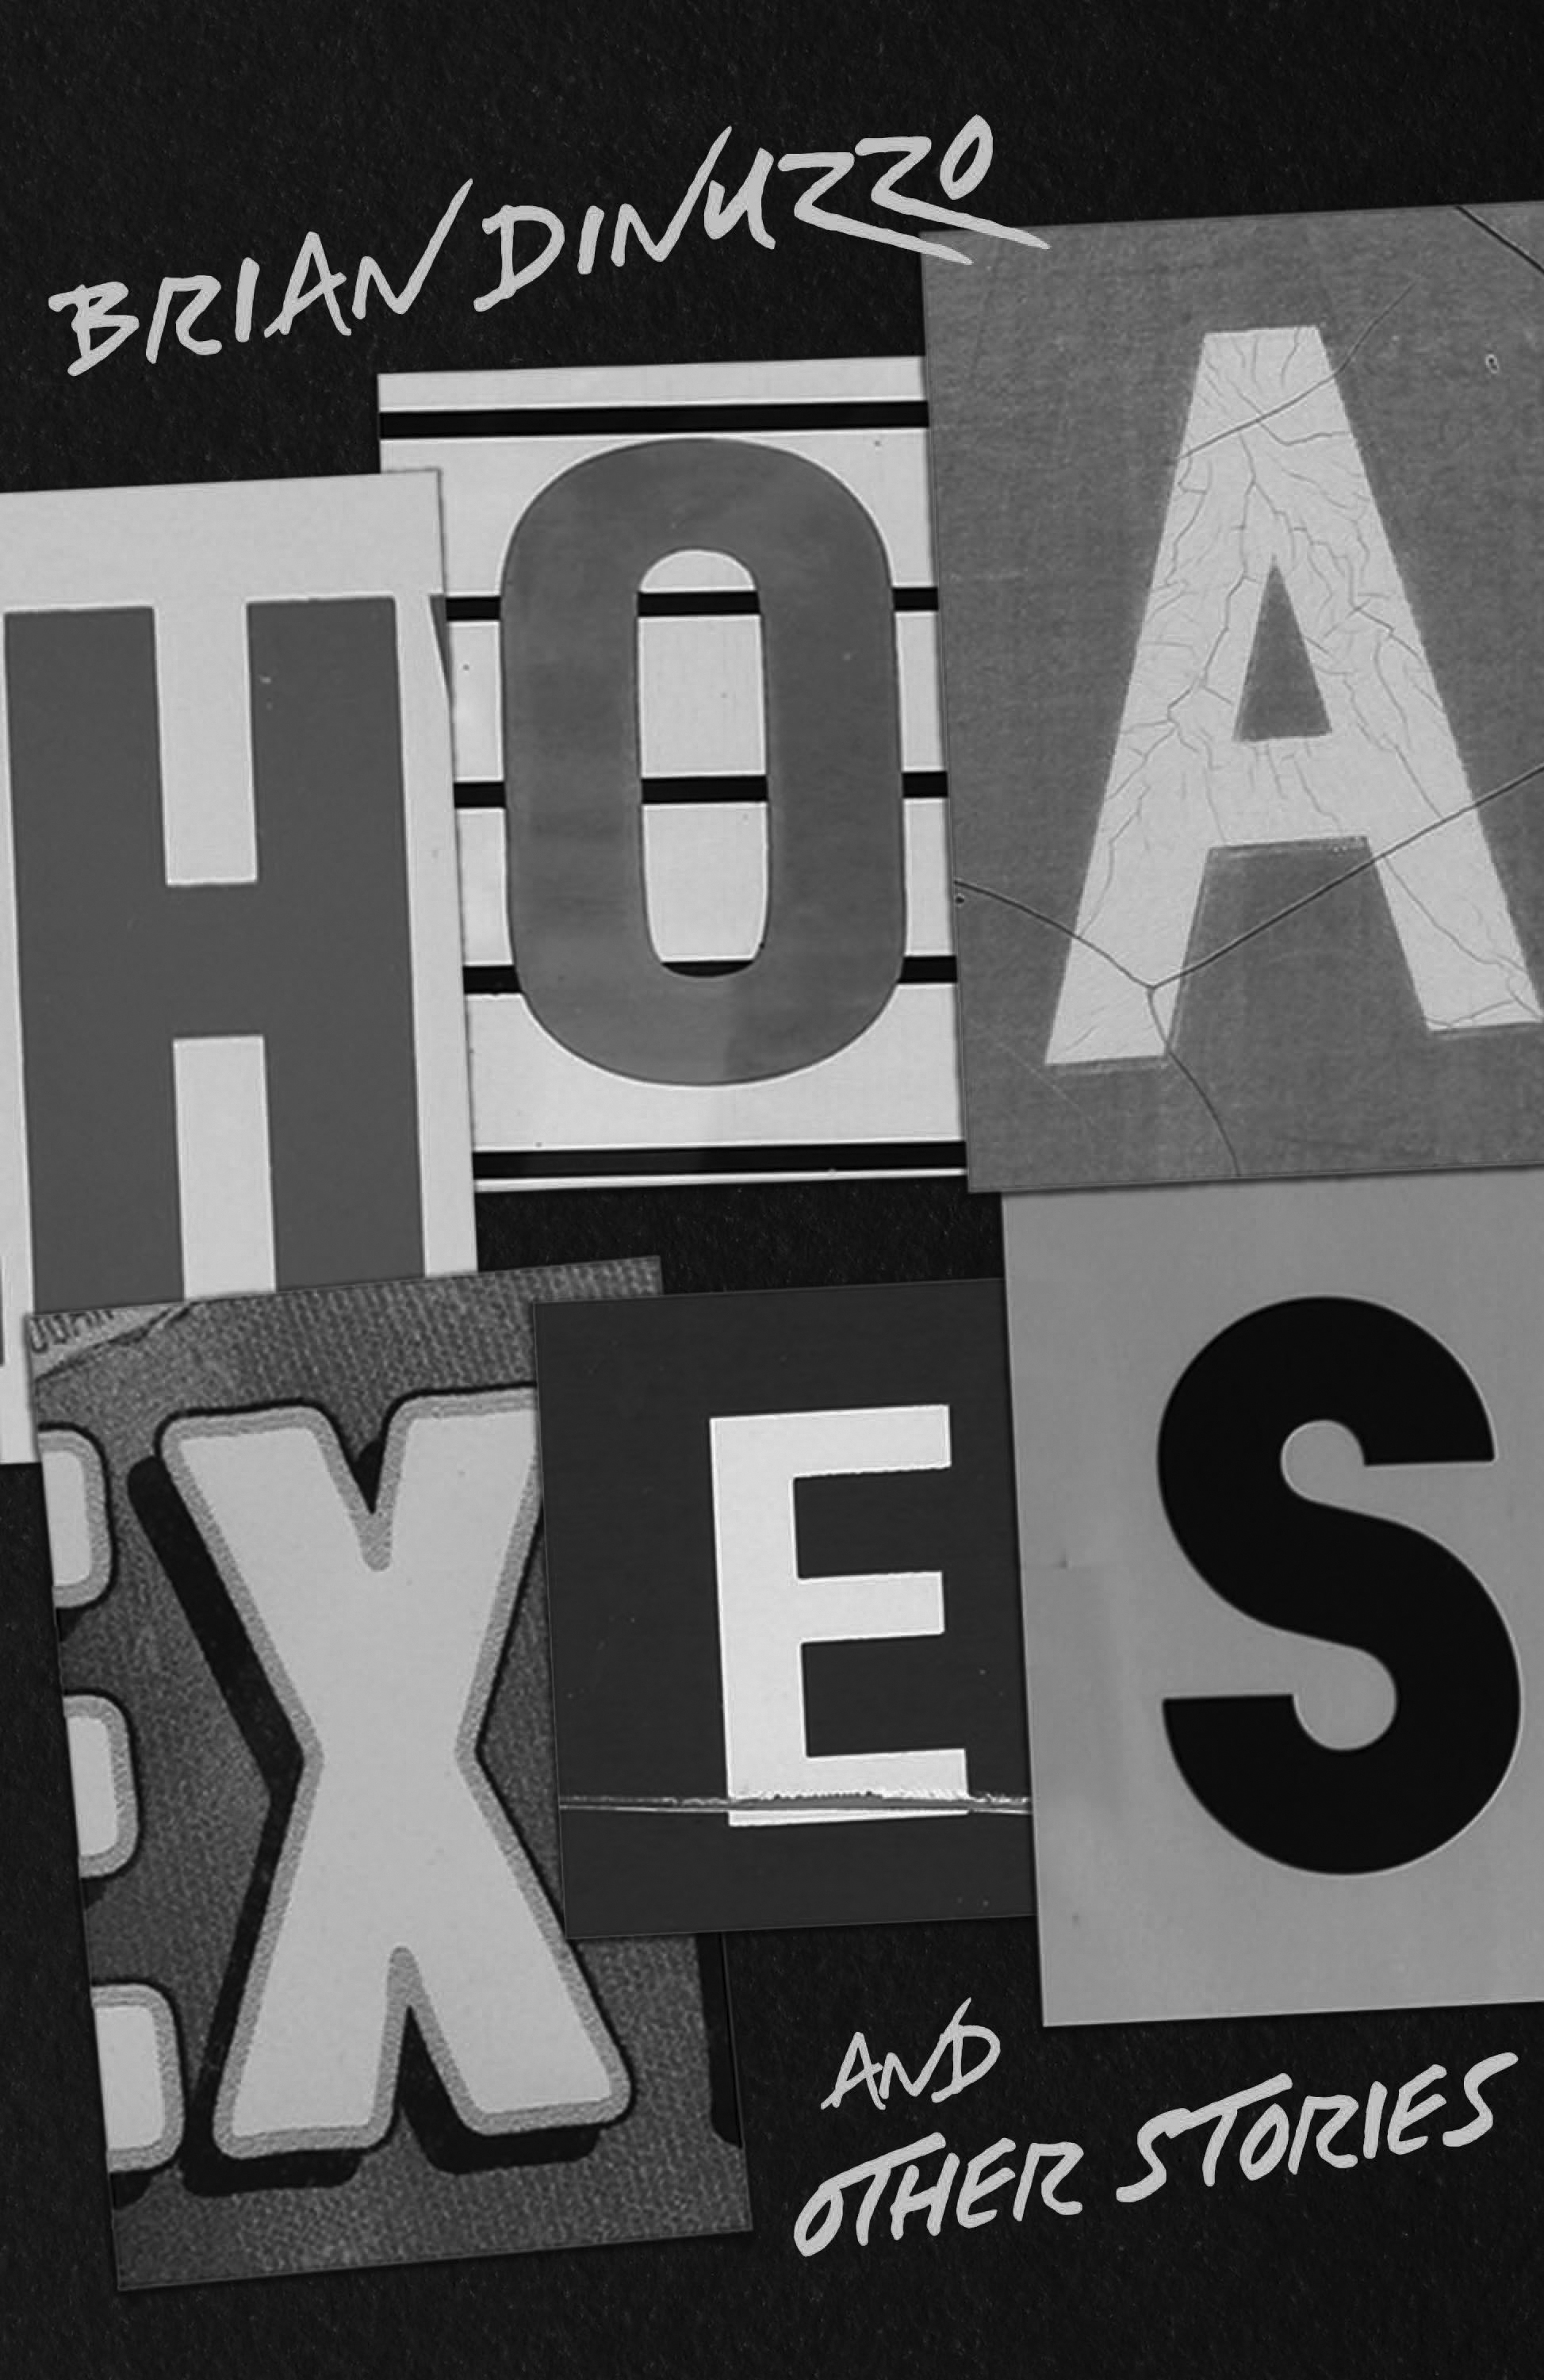 UW Press: Hoaxes and Other Stories